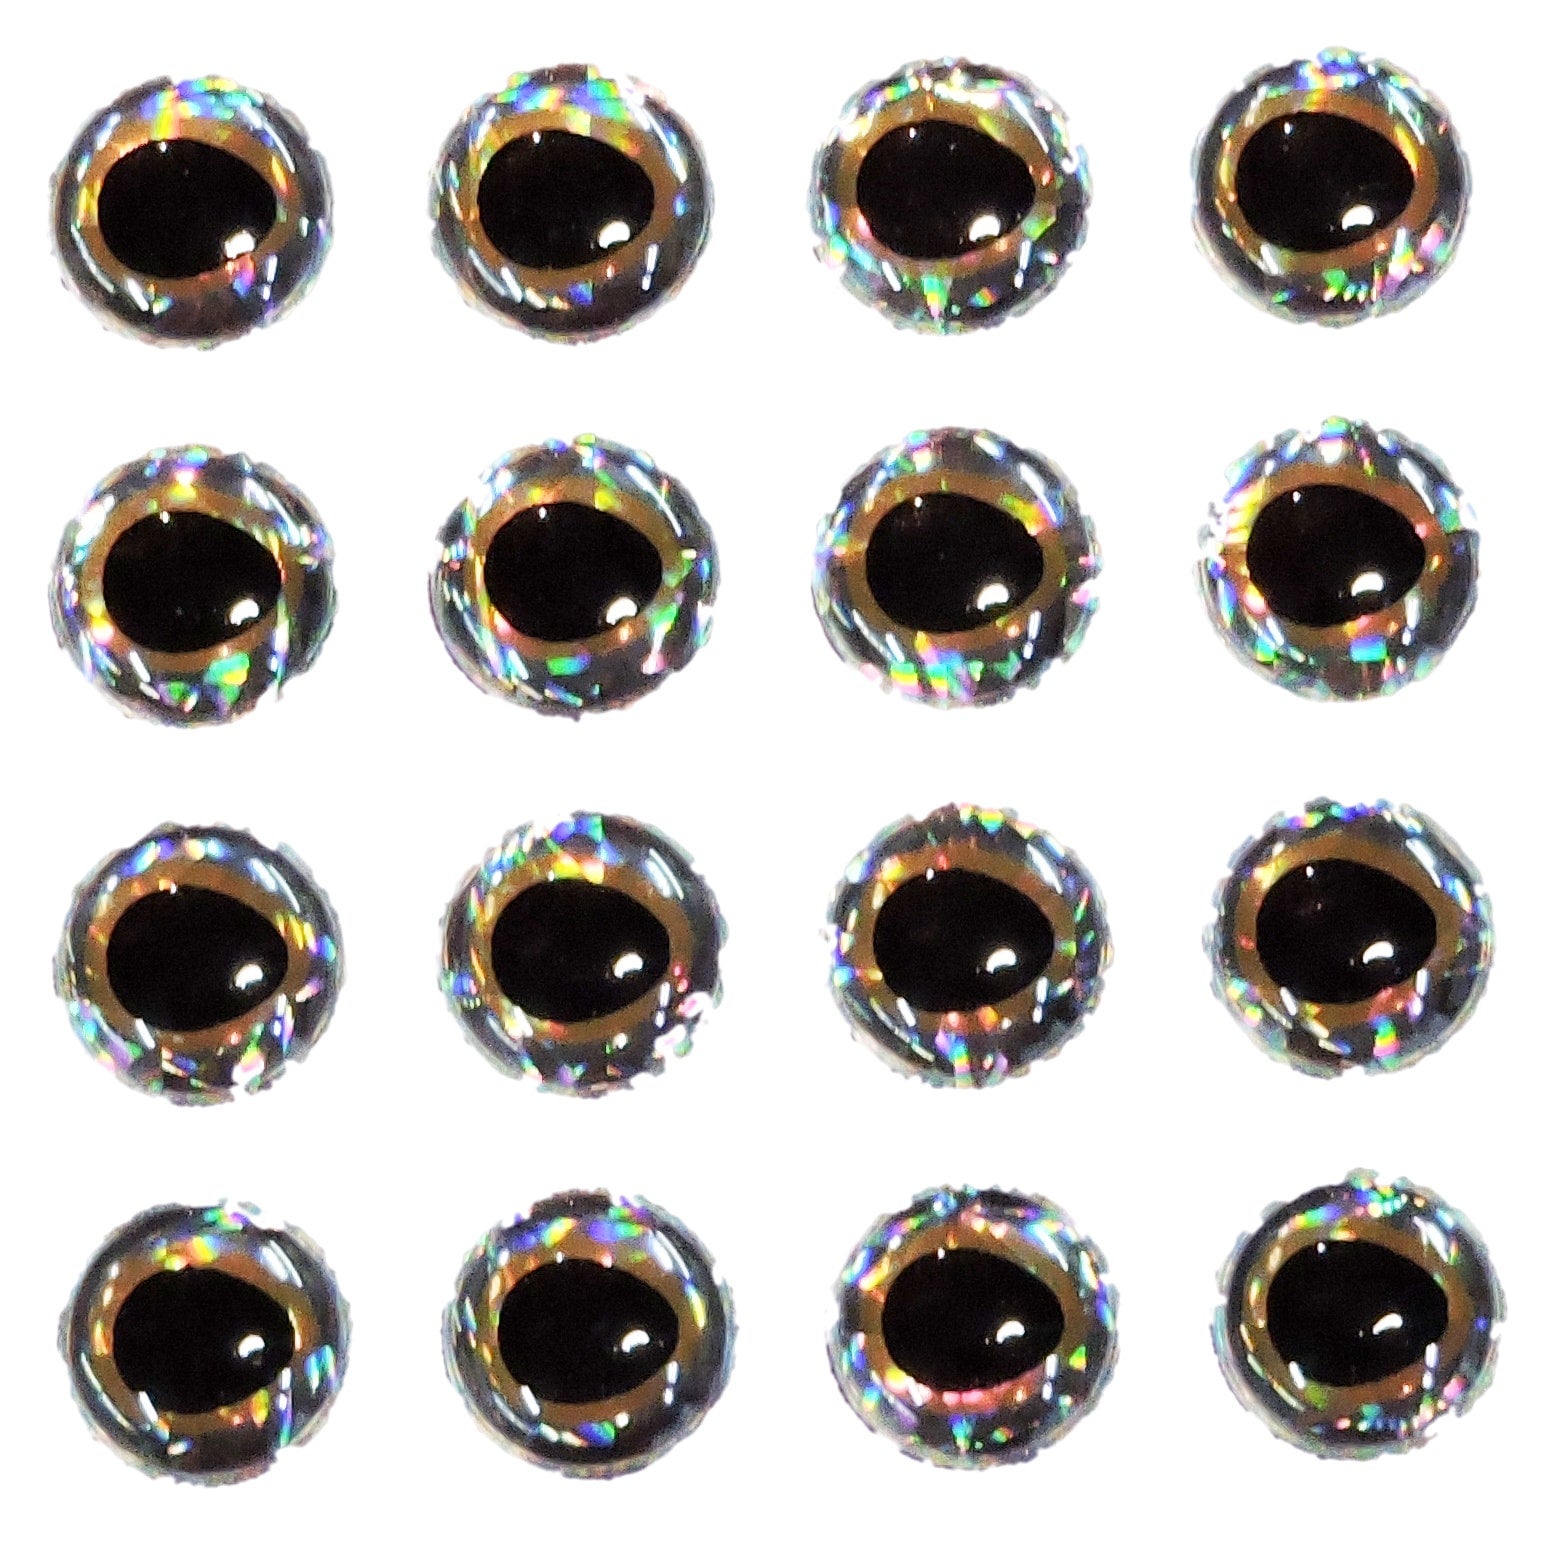 7mm (9/32) - 3D Holographic Eyes for Fly Tying and Lure Making (120 Count)